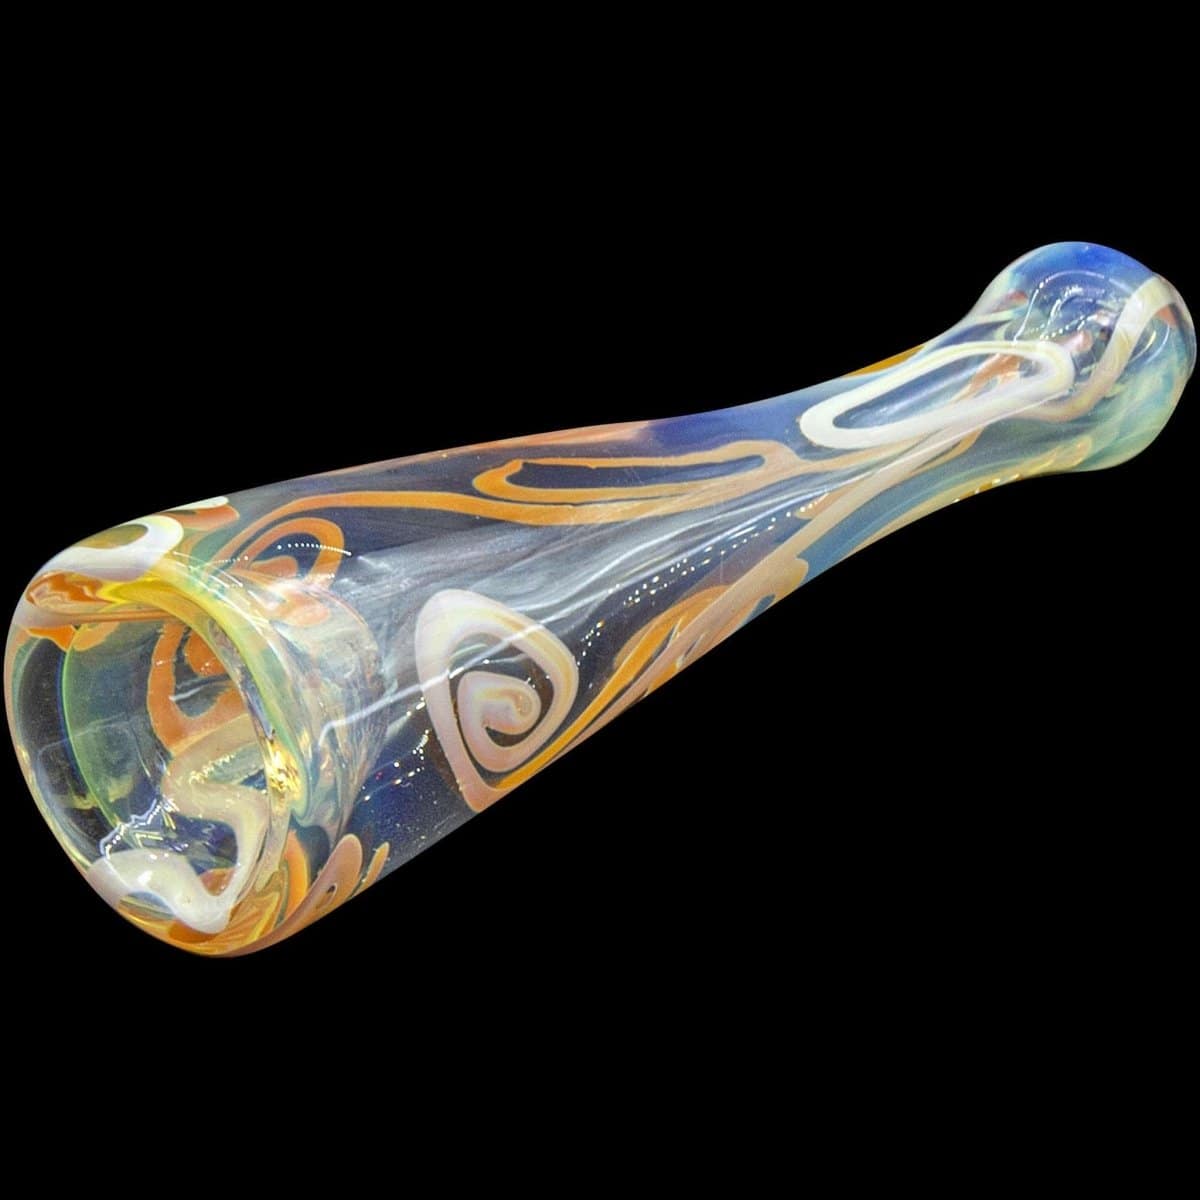 LA Pipes Hand Pipe Amber "Warrior Piper" Inside-Out Funnel Chillum Herb Pipe